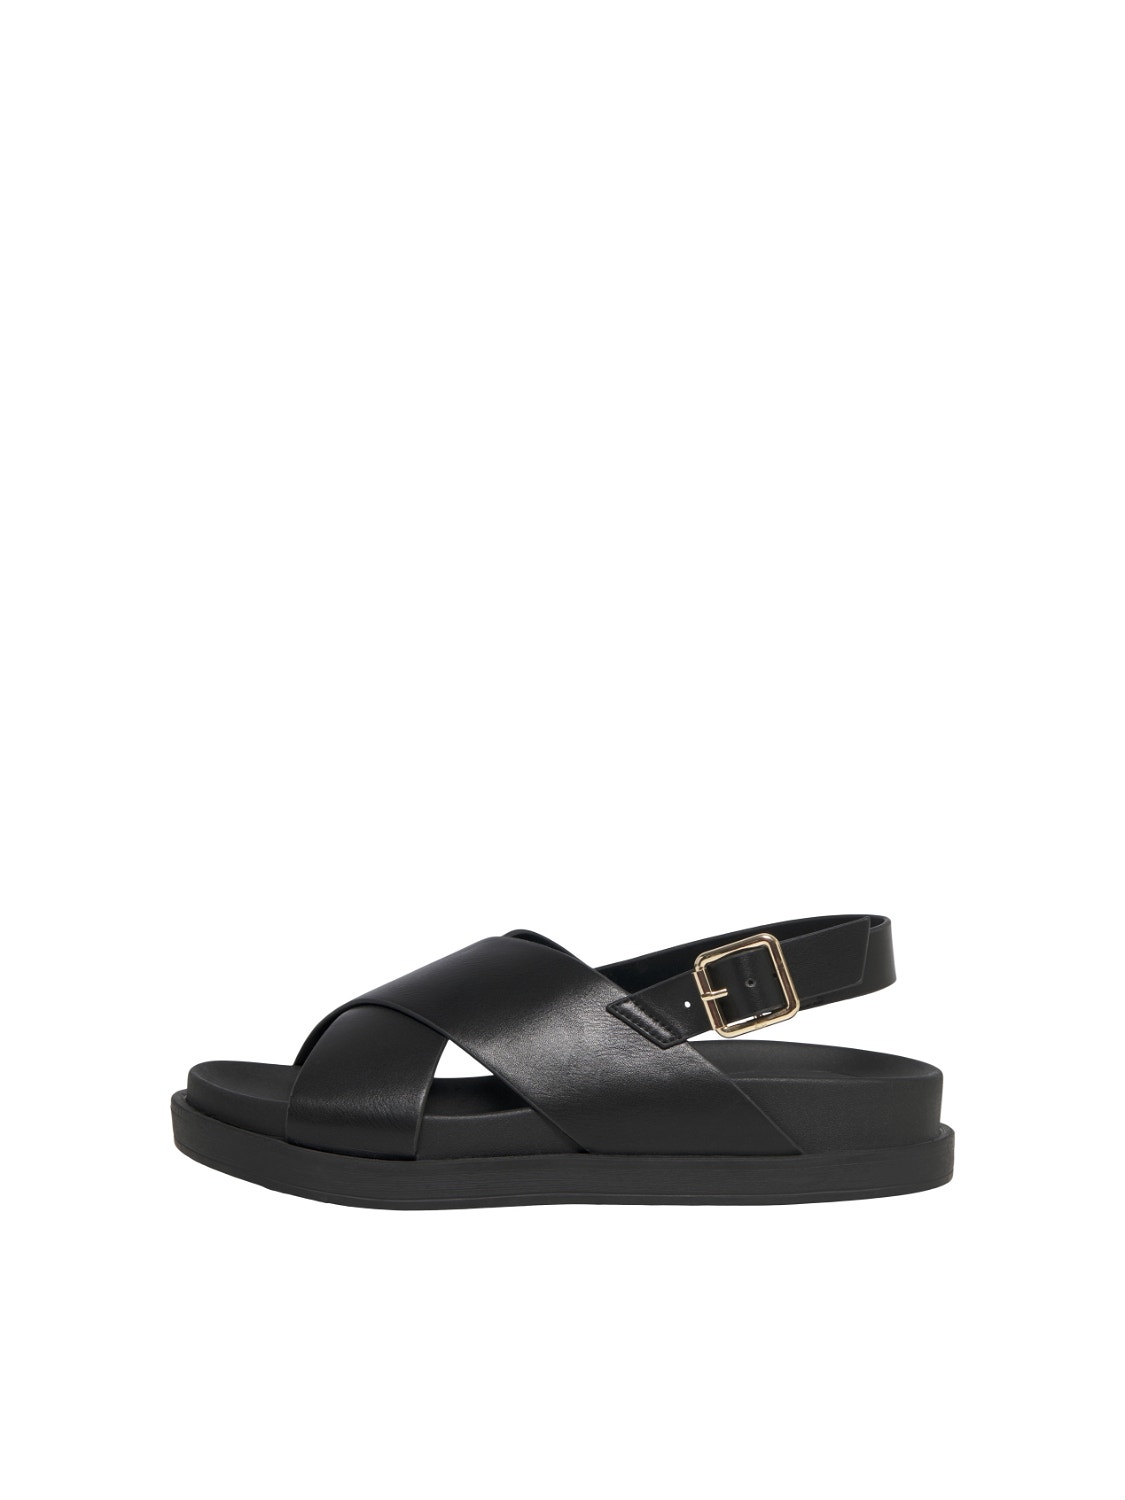 ONLY Faux leather slingback Sandals -Black - 15253212